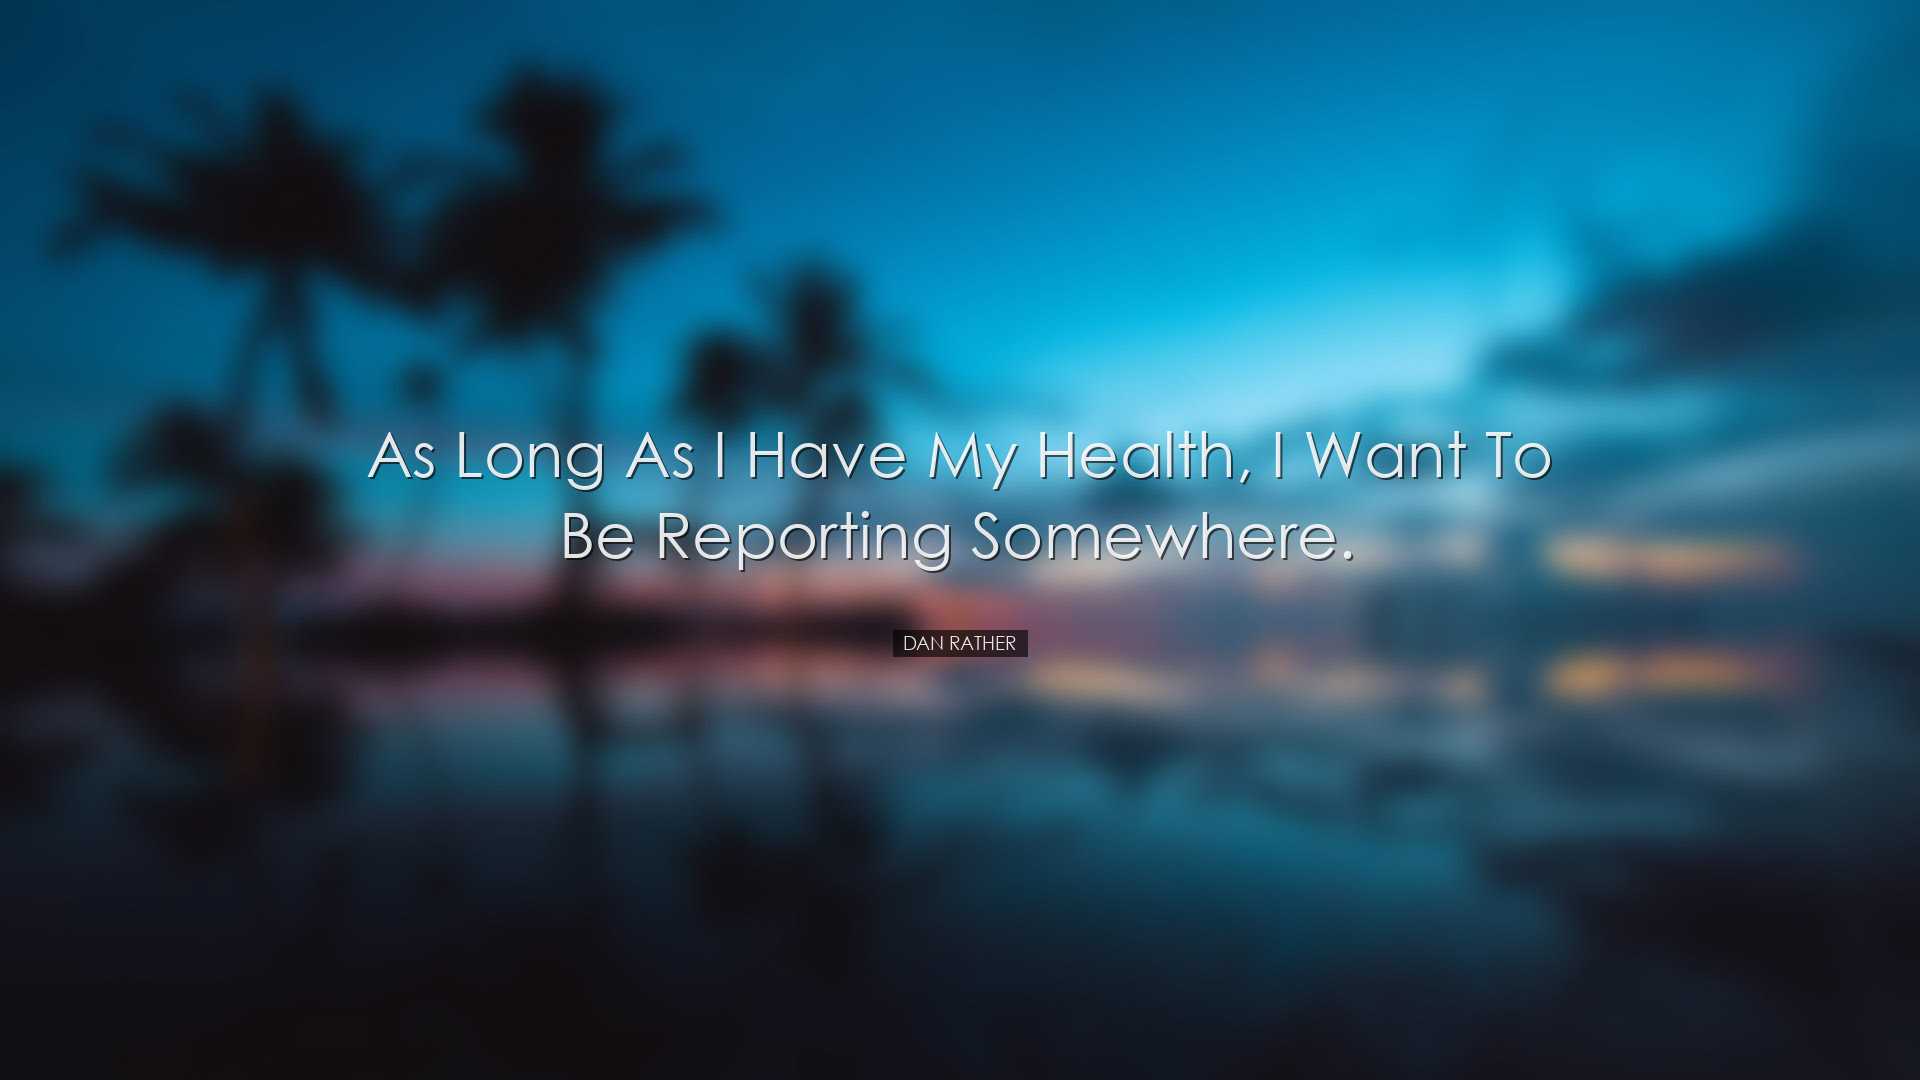 As long as I have my health, I want to be reporting somewhere. - D